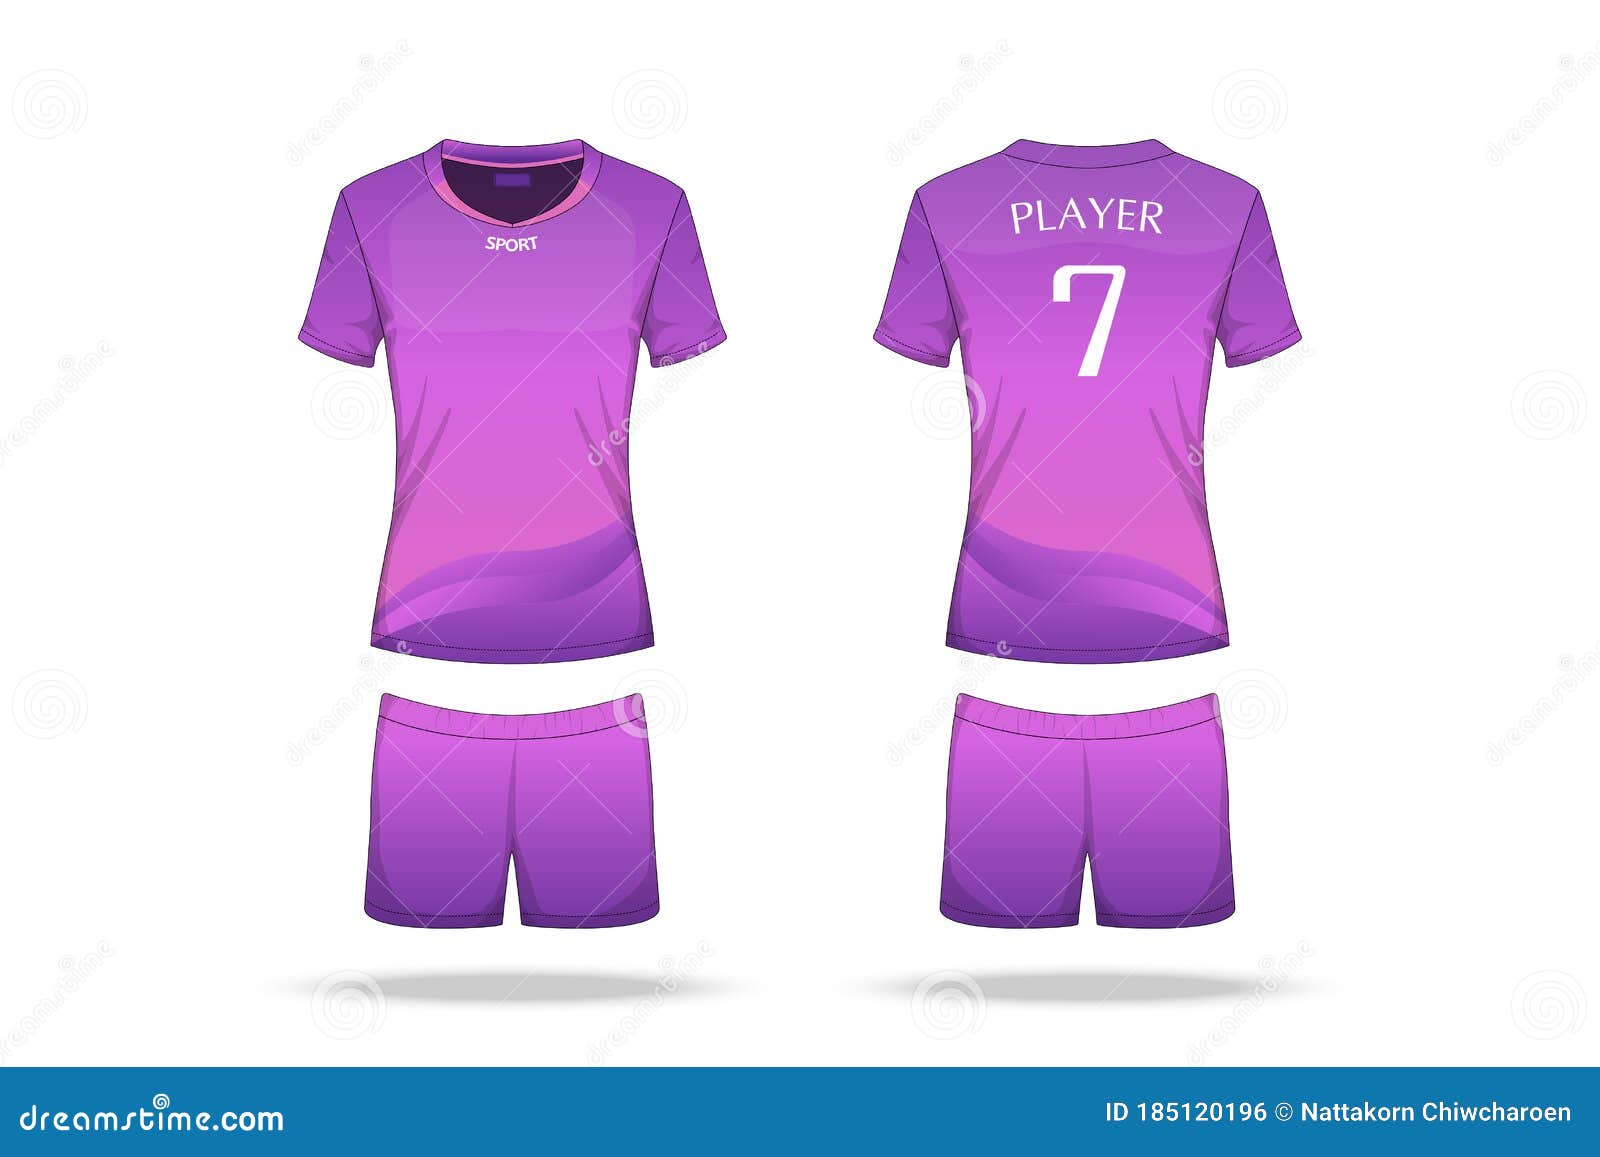 Download Specification Volleyball Jersey Isolated On White Background Sport T Shirt Round Neck And Short Pants Template Mockup Team Stock Vector Illustration Of Mockup Round 185120196